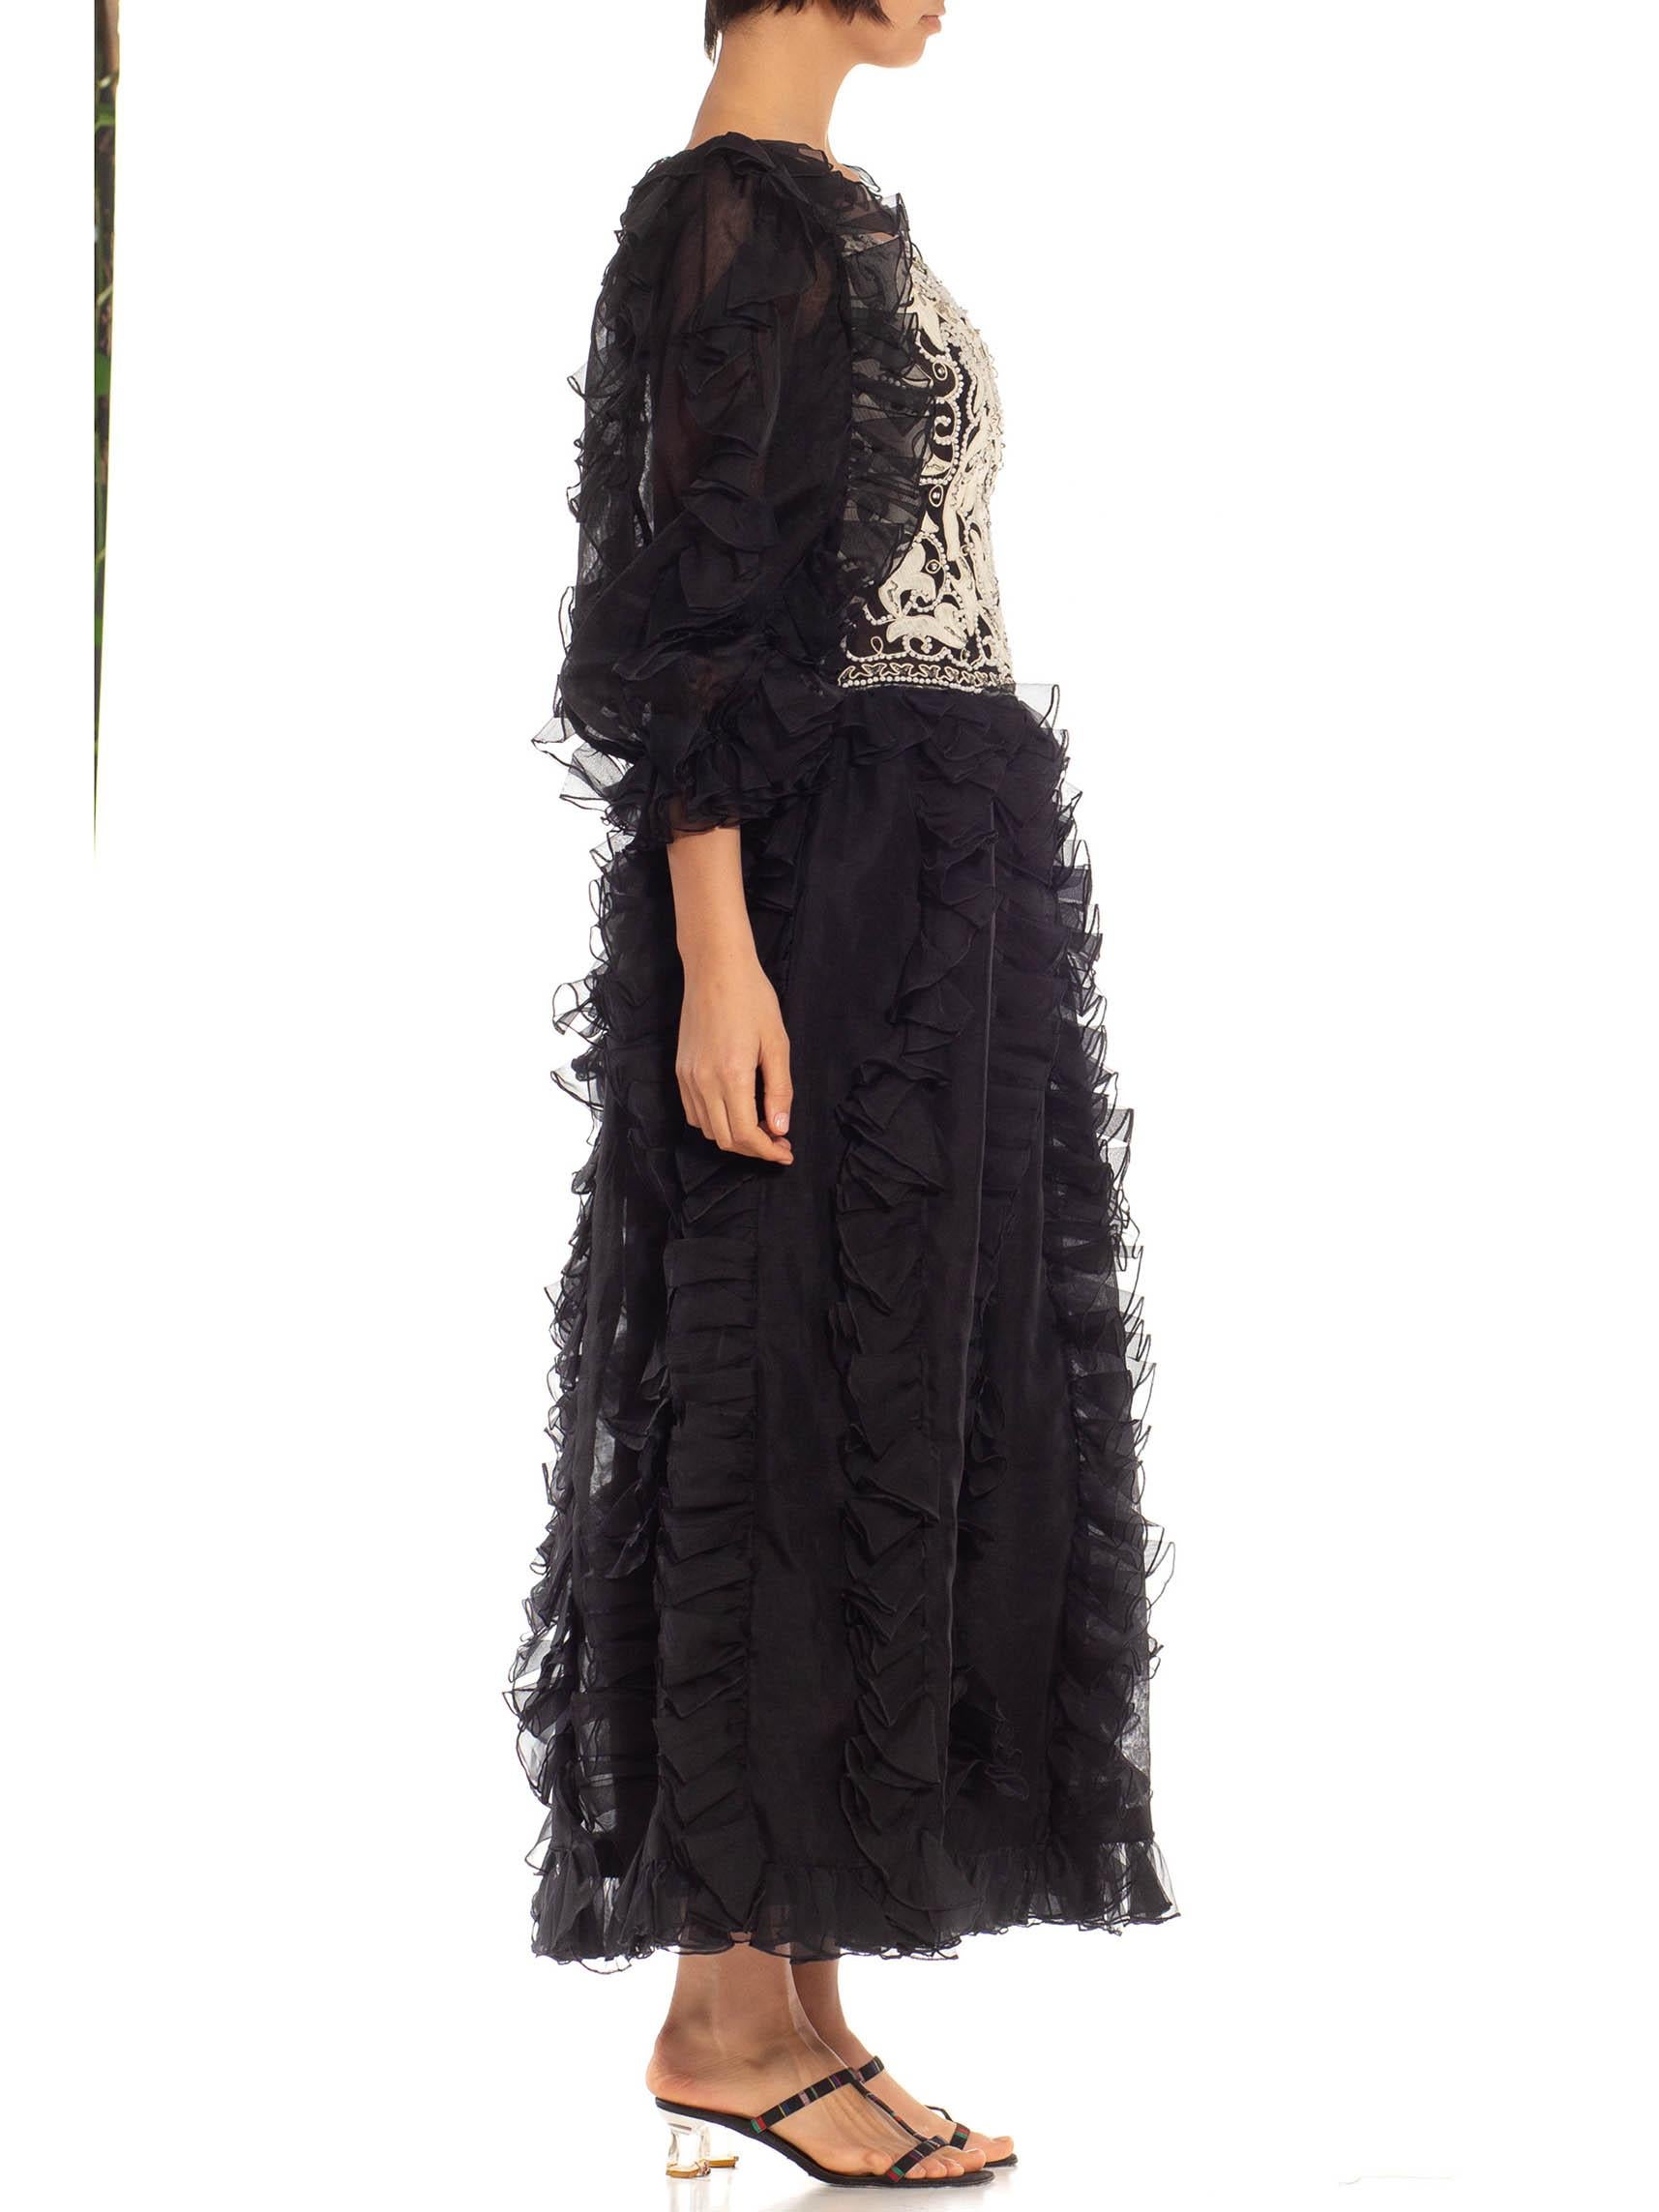 1980S OSCAR DE LA RENTA Black & White Silk Beaded Ruffle Gown With Giant Sleeves In Excellent Condition For Sale In New York, NY